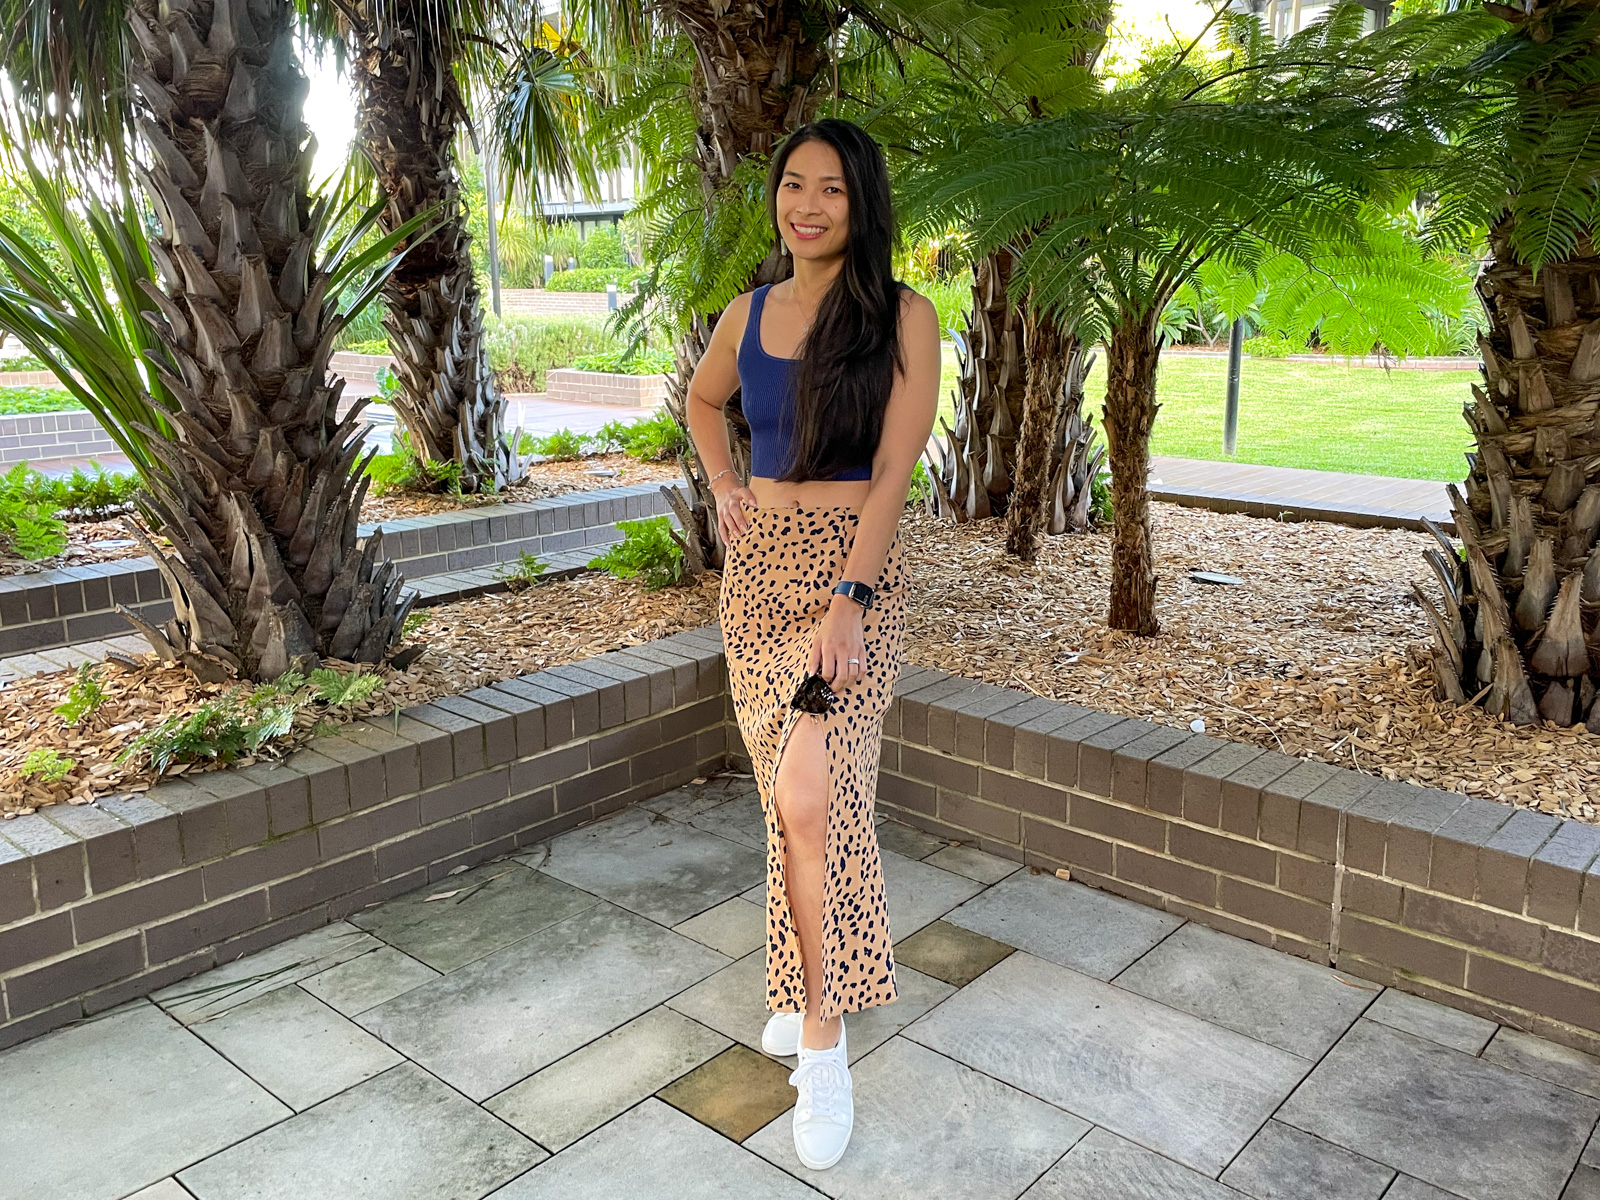 An Asian woman with long dark hair, wearing a long tan coloured midi skirt with a dark animal print, and a fitted blue top. She has a hand on her hip. She is standing on concrete tiles and in the background are some planted trees.